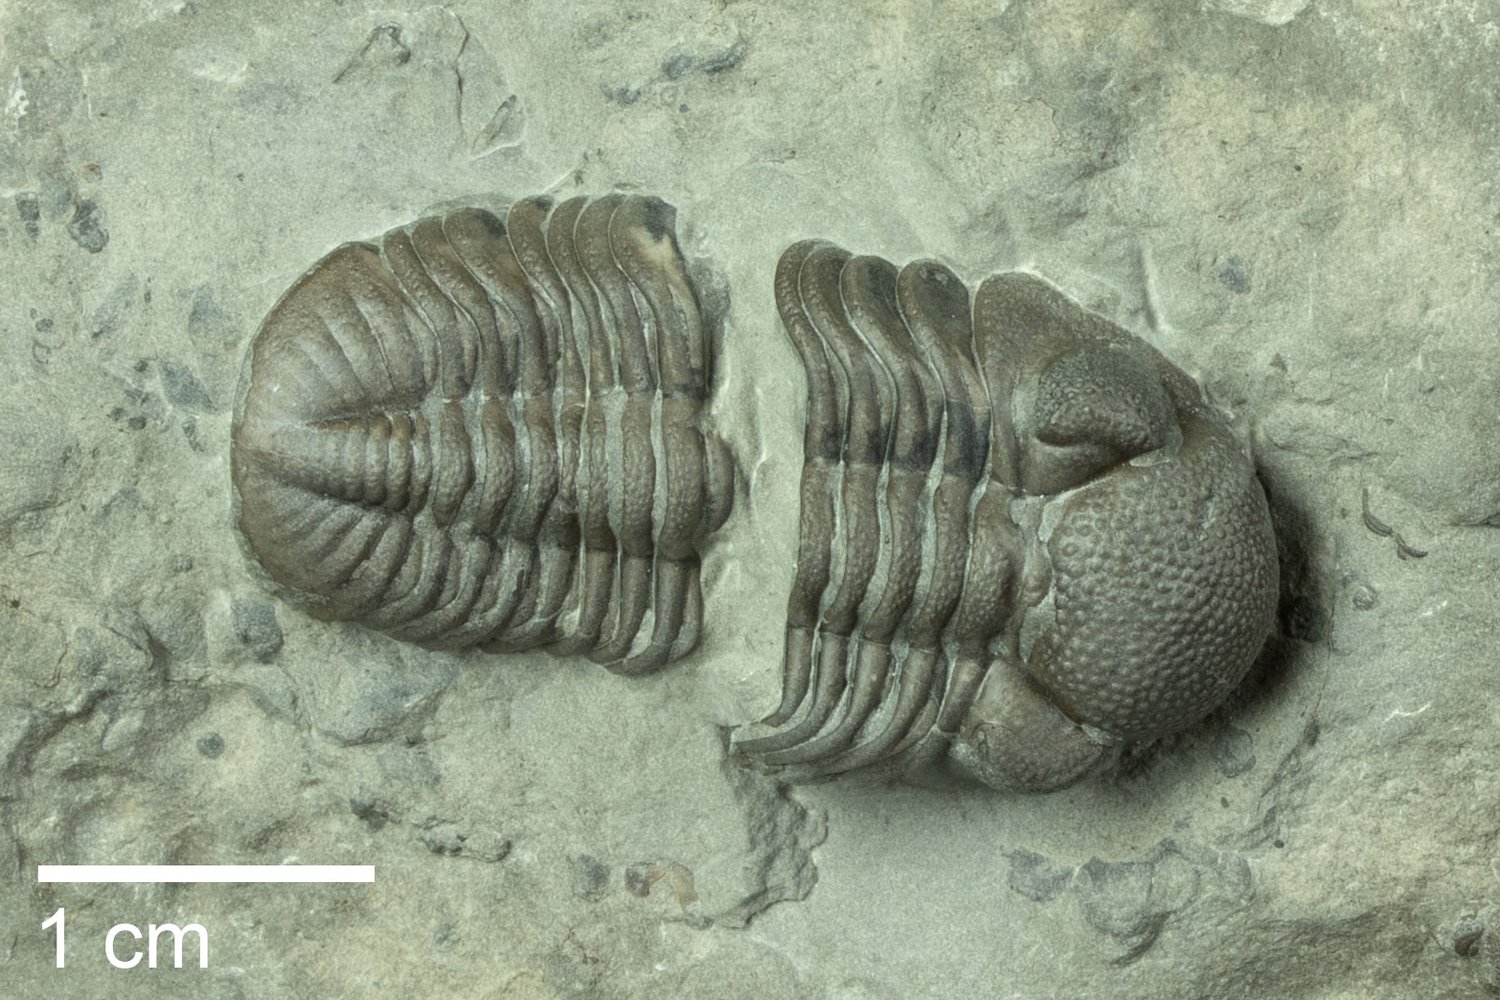 Photograph of a specimen of Eldredgeops rana trilobite from the Devonian of New York State.